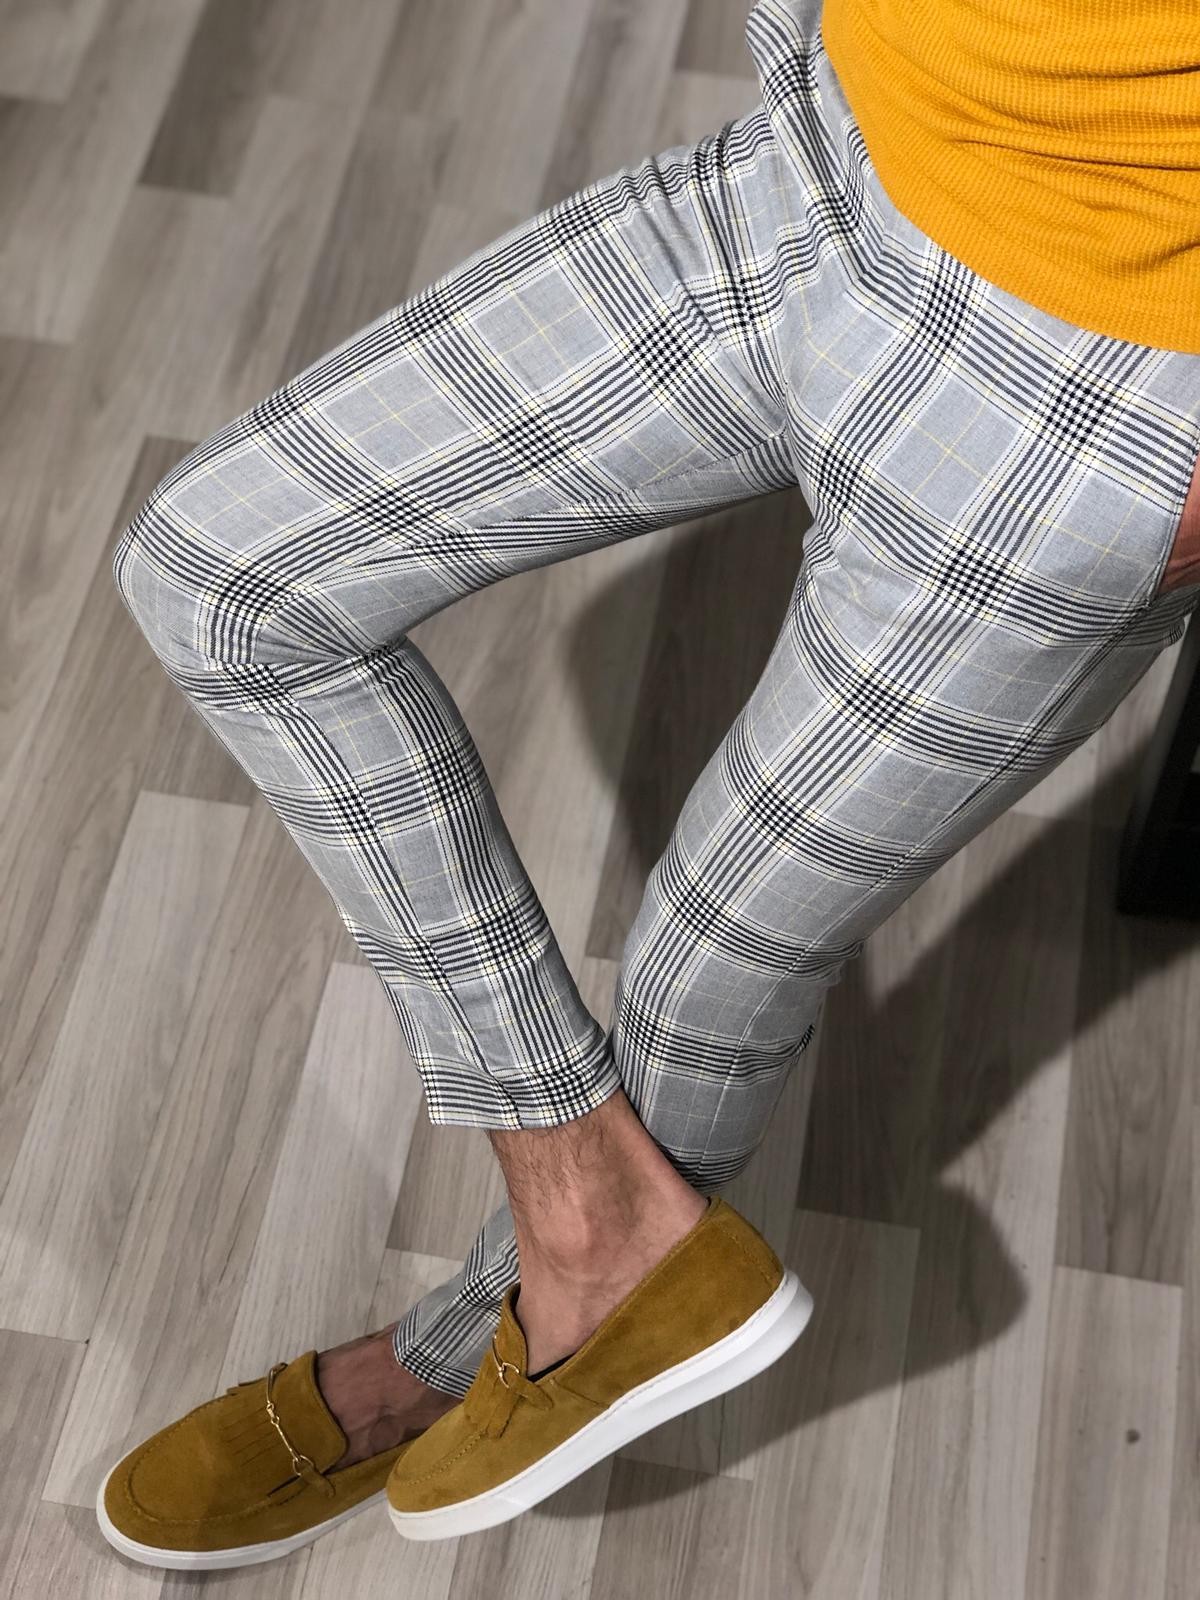 Buy Yellow Slim Fit Plaid Pants by Gentwith.com with Free Shipping